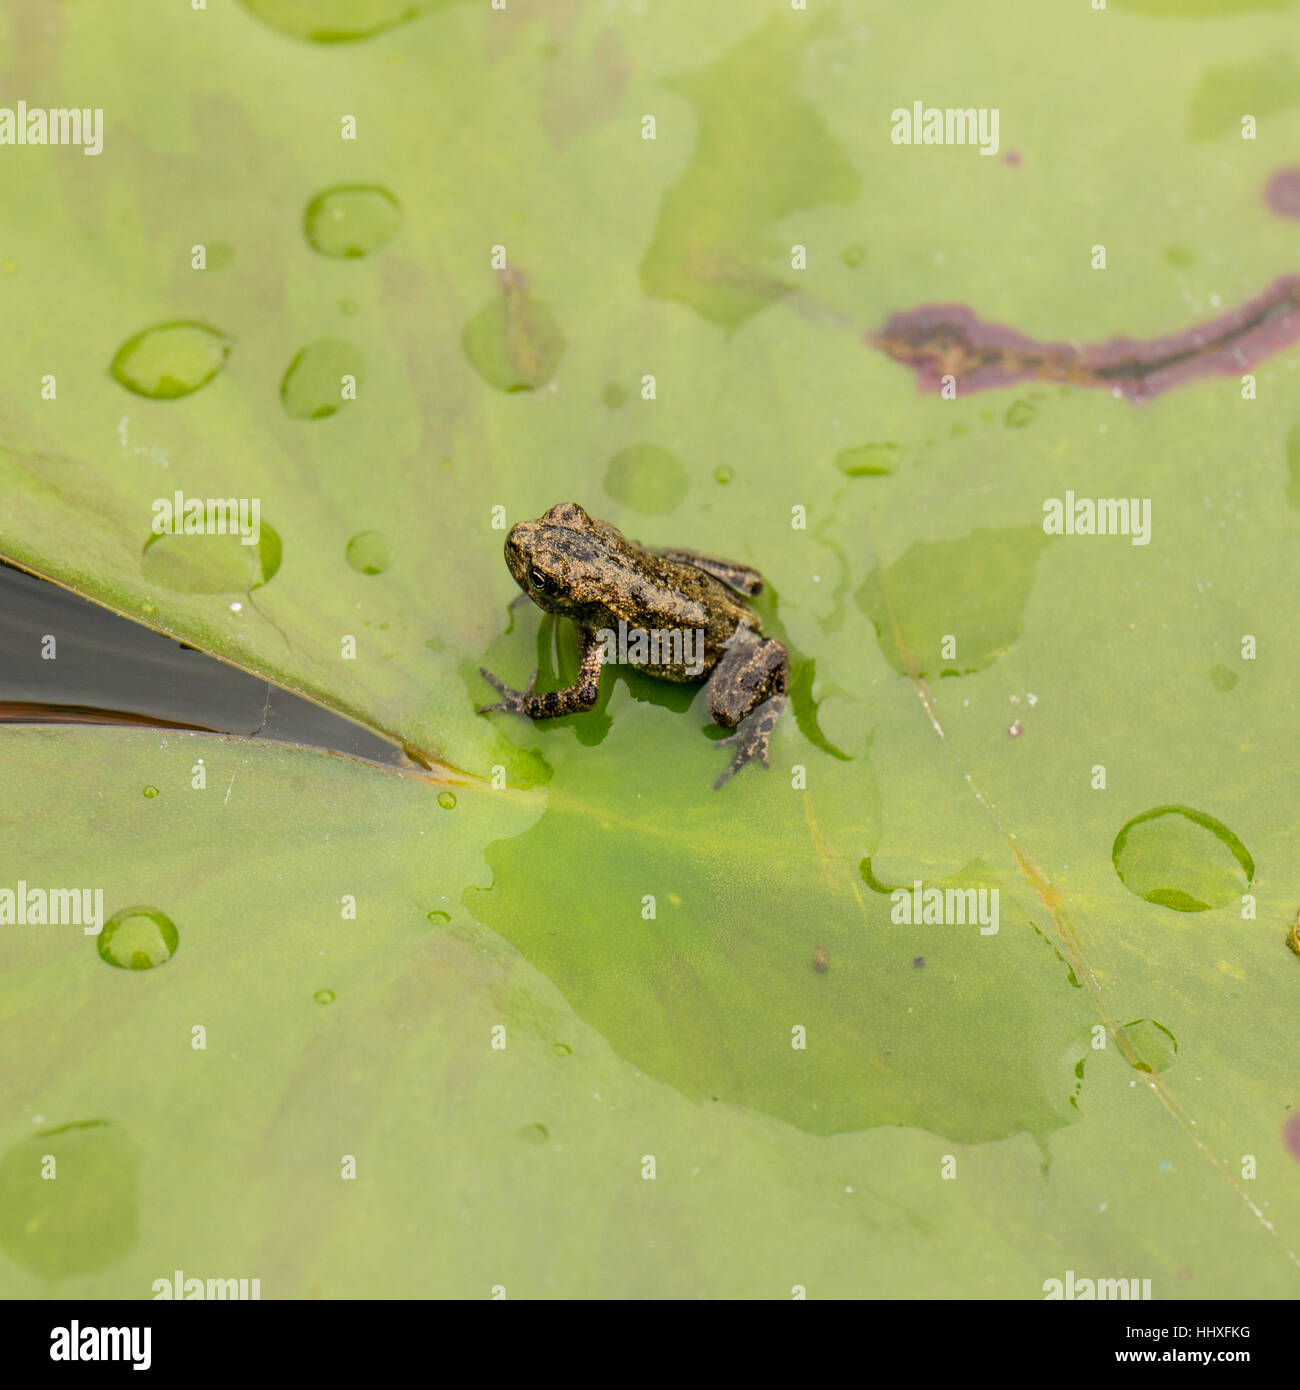 small baby common frog sitting on a waterlily in pond next to water droplets Stock Photo